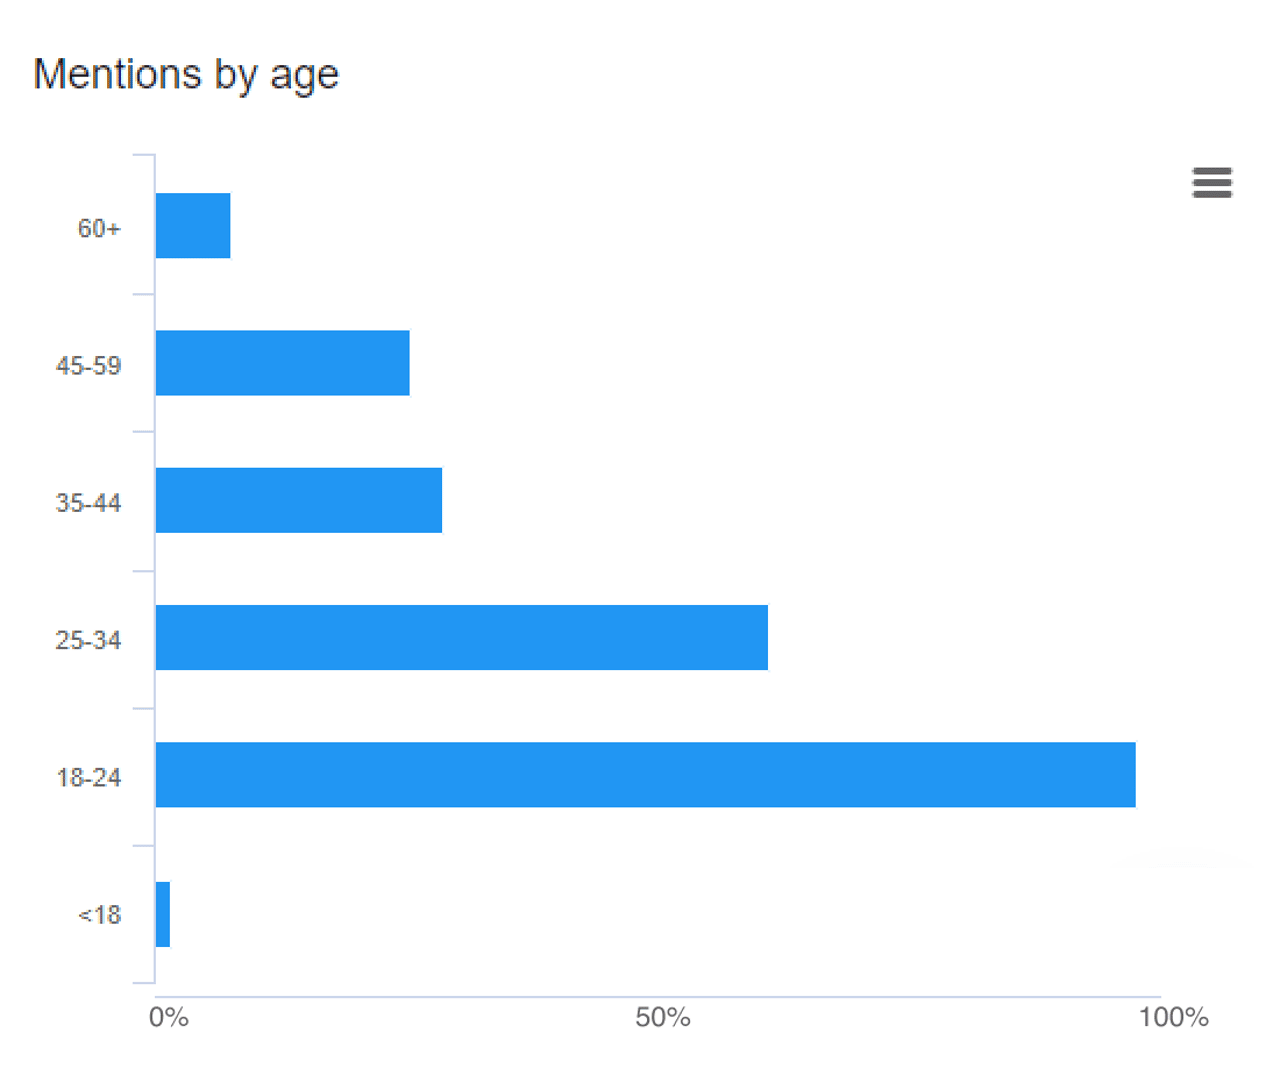 Starbucks - Mentions by age